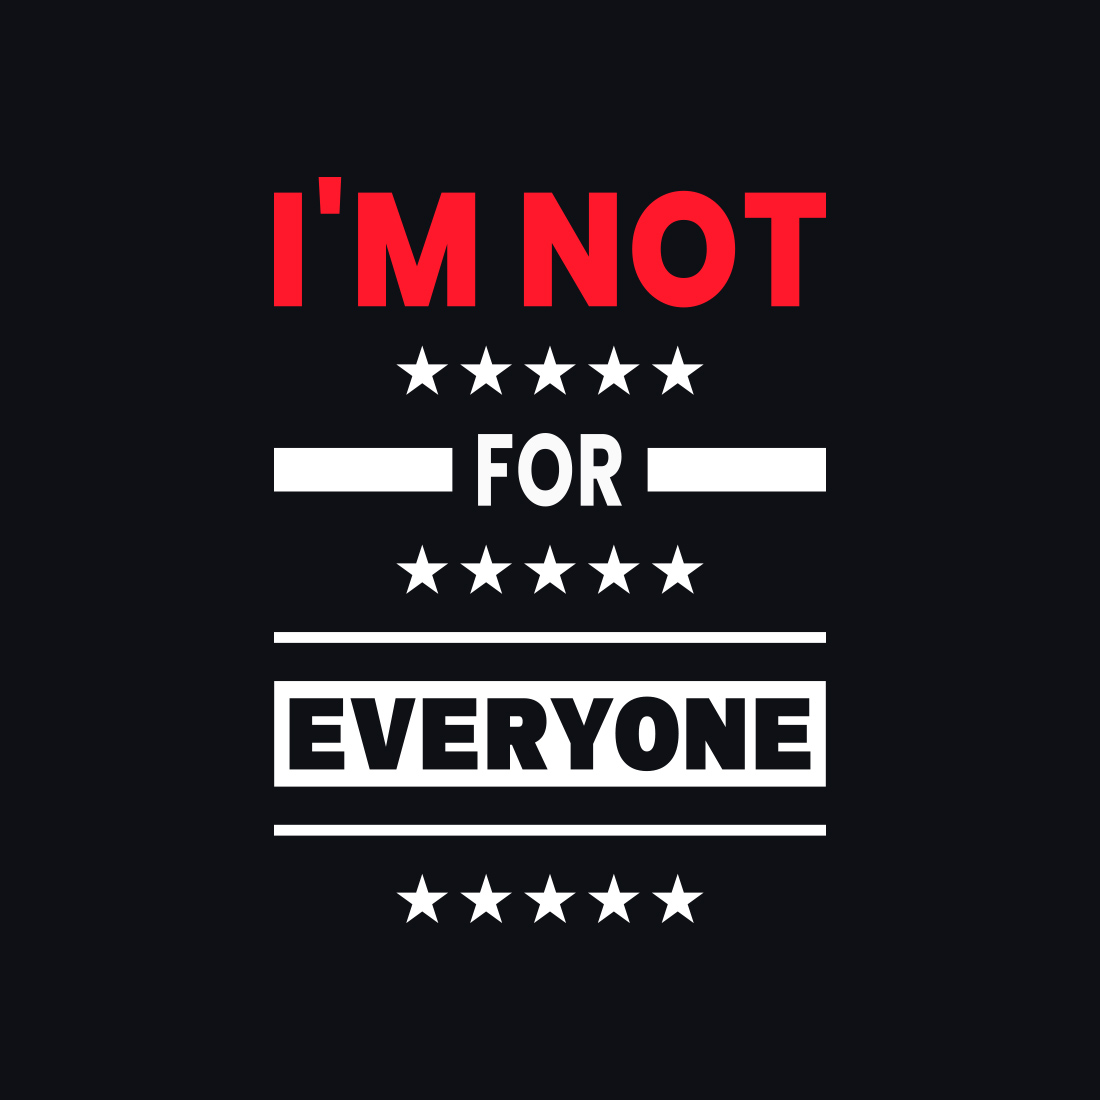 I'm Not for Everyone Typography T-Shirt Design preview with black background.